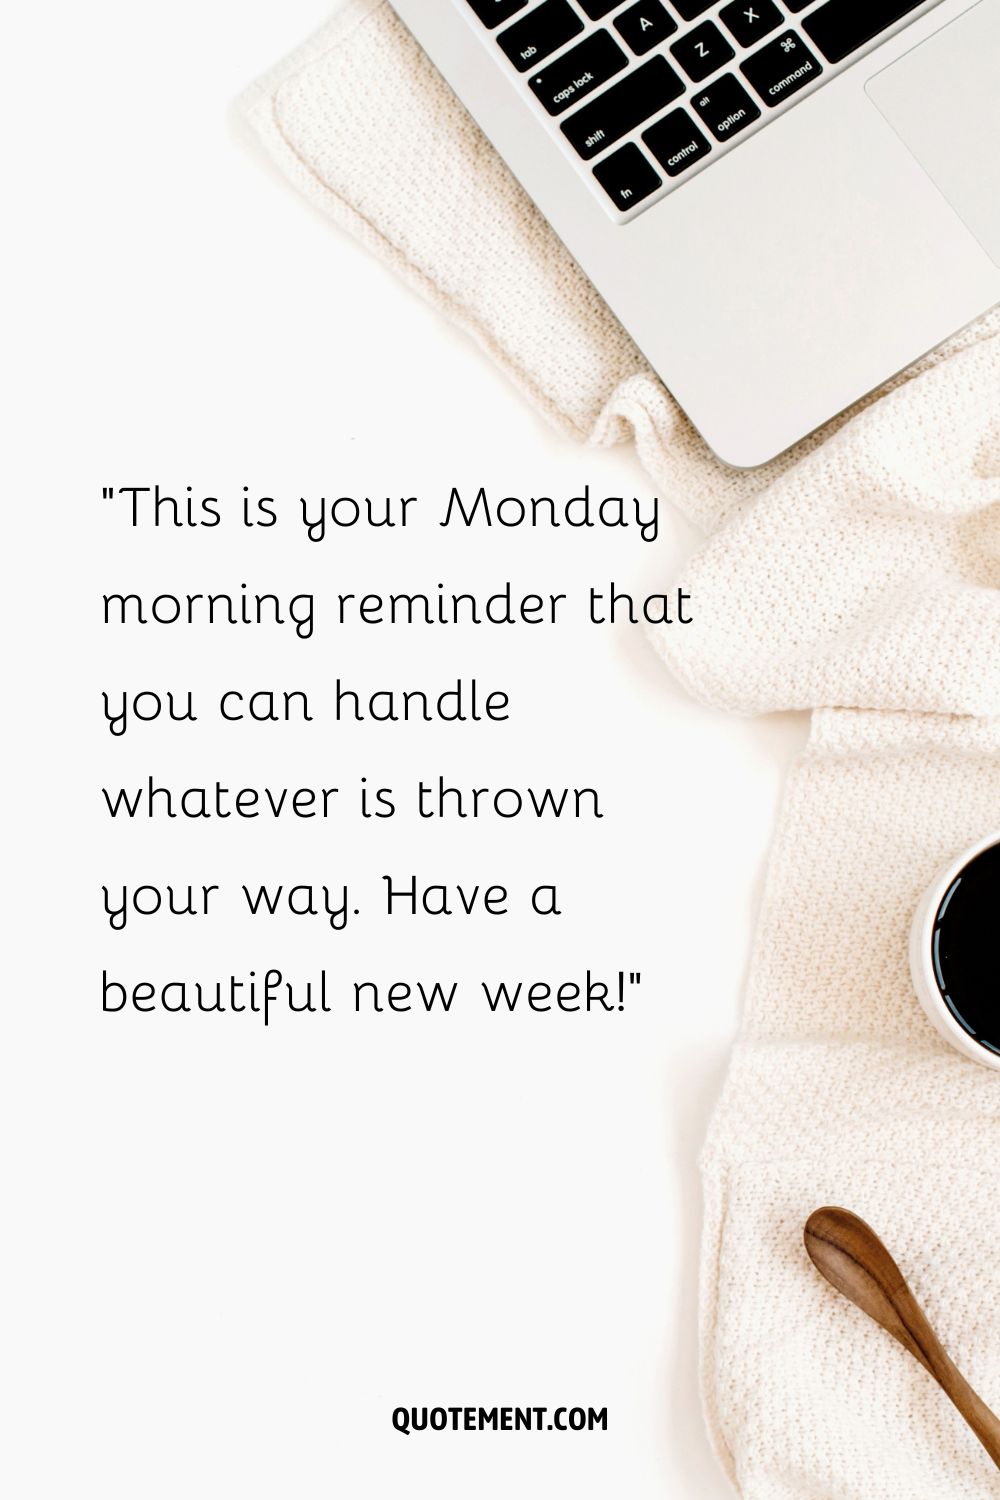 50 Amazing New Week Blessings To Start Your Week Right